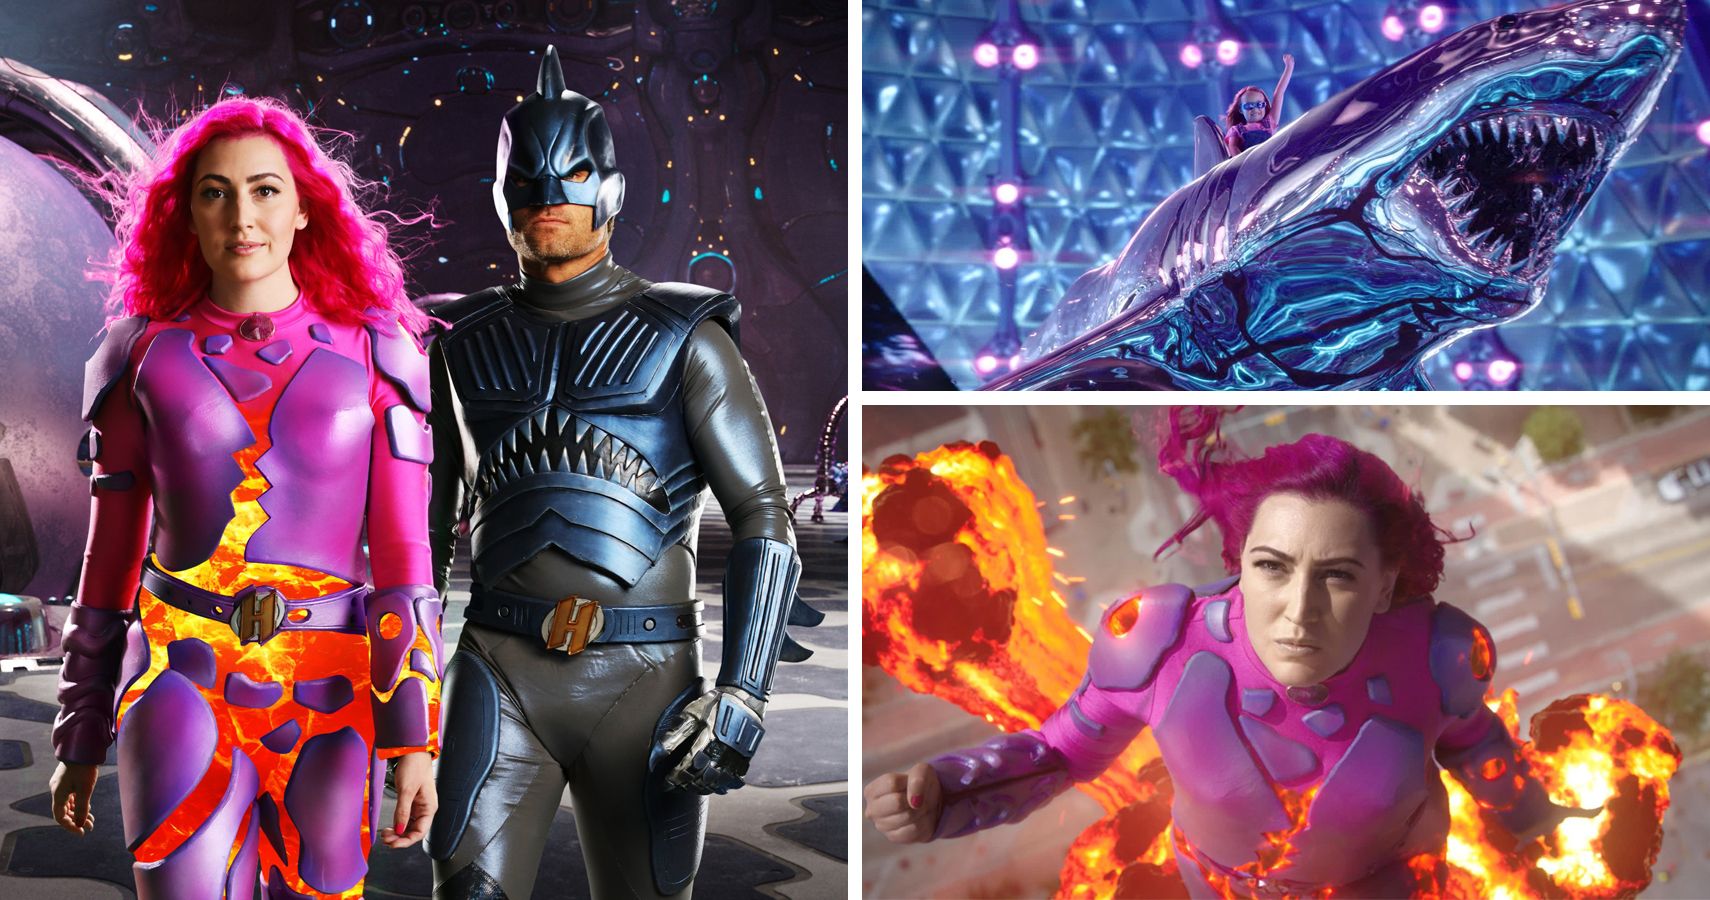 Sharkboy and Lavagirl Return As Parents In ‘We Can Be Heroes’